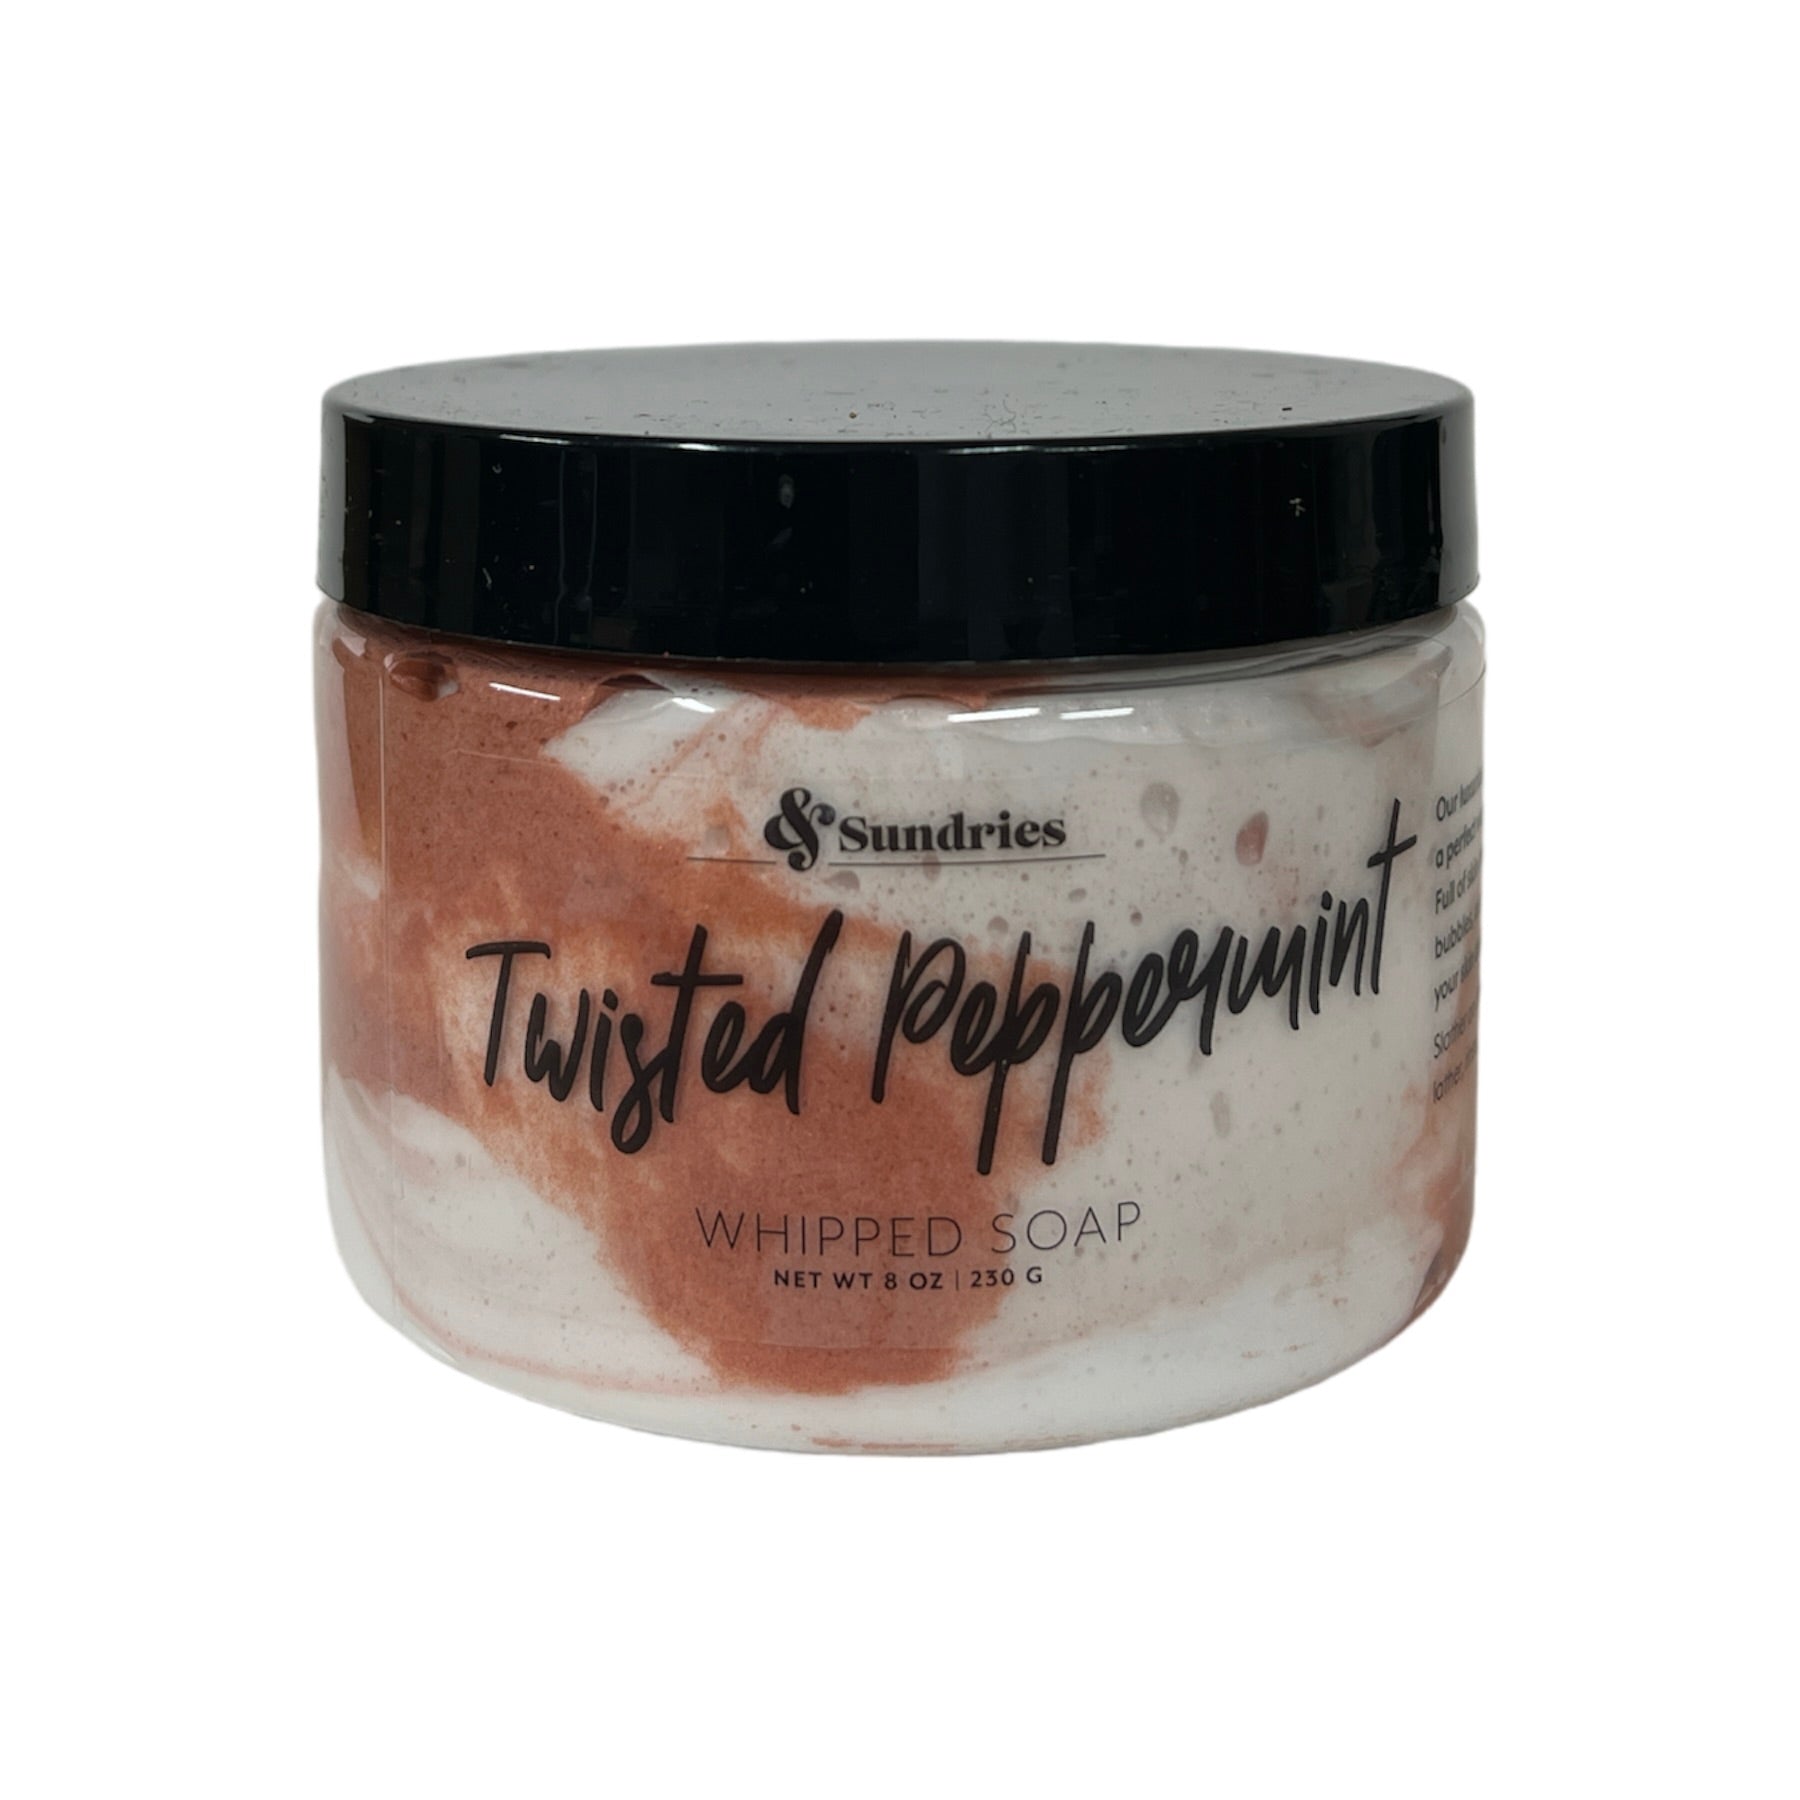 FINAL SALE Twisted Peppermint Whipped Soap